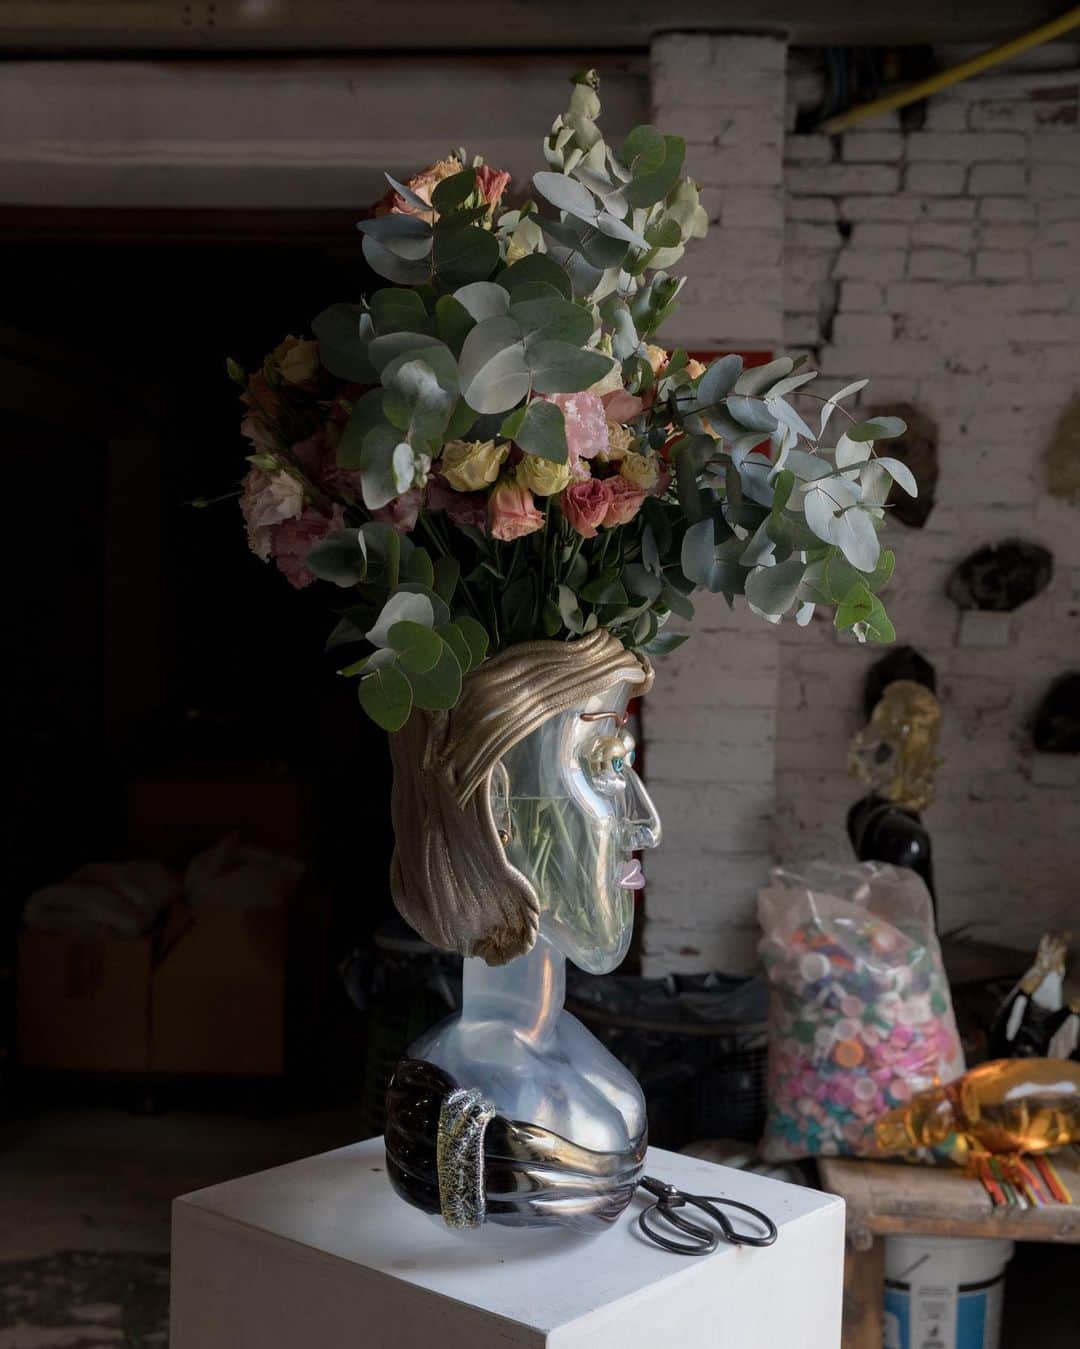 New York Times Fashionのインスタグラム：「Is this what Anne Hathaway, Jackie Kennedy and Jean-Michel Basquiat would look like if they were rendered out of glass?  The artist Hugh Findletar creates bust-like vases out of glass — interpretations of both famous and non-famous faces — which he calls “flowerheadz.” He has made versions inspired by people such as the model Naomi Campbell, a doorwoman who works at his apartment building in Milan and Solomon, the biblical king.  In September, @mr.flowerheadz will introduce new vases at Bergdorf Goodman in Midtown Manhattan, as part of a group art show hosted by the Spaceless Gallery in the department store’s home décor section. Some of the pieces that will be there are modeled after people connected to New York, including the jazz singer Billie Holiday; Patricia Field, the merchant turned “Sex and the City” costume designer; and Jacqueline Kennedy Onassis.  Findletar works out of glassblowing workshops on Murano, the Italian island near Venice known for its centuries-old glass industry. He typically works with five other artisans to create each flowerheadz vase. (Ears are applied last.)  He is among a handful of Black glass artists who have penetrated the glassmaking industry in Venice, said Adrienne Childs, an art historian and an associate at the W.E.B. Du Bois Research Institute at Harvard. In an interview with The New York Times, Findletar said he sees making the flowerheadz vases as a way of trying to repopulate the planet with “my people of every color, even green.”  Tap the link in our bio to see more of Findletar’s distinctive glass vases. Photos by @demayda」